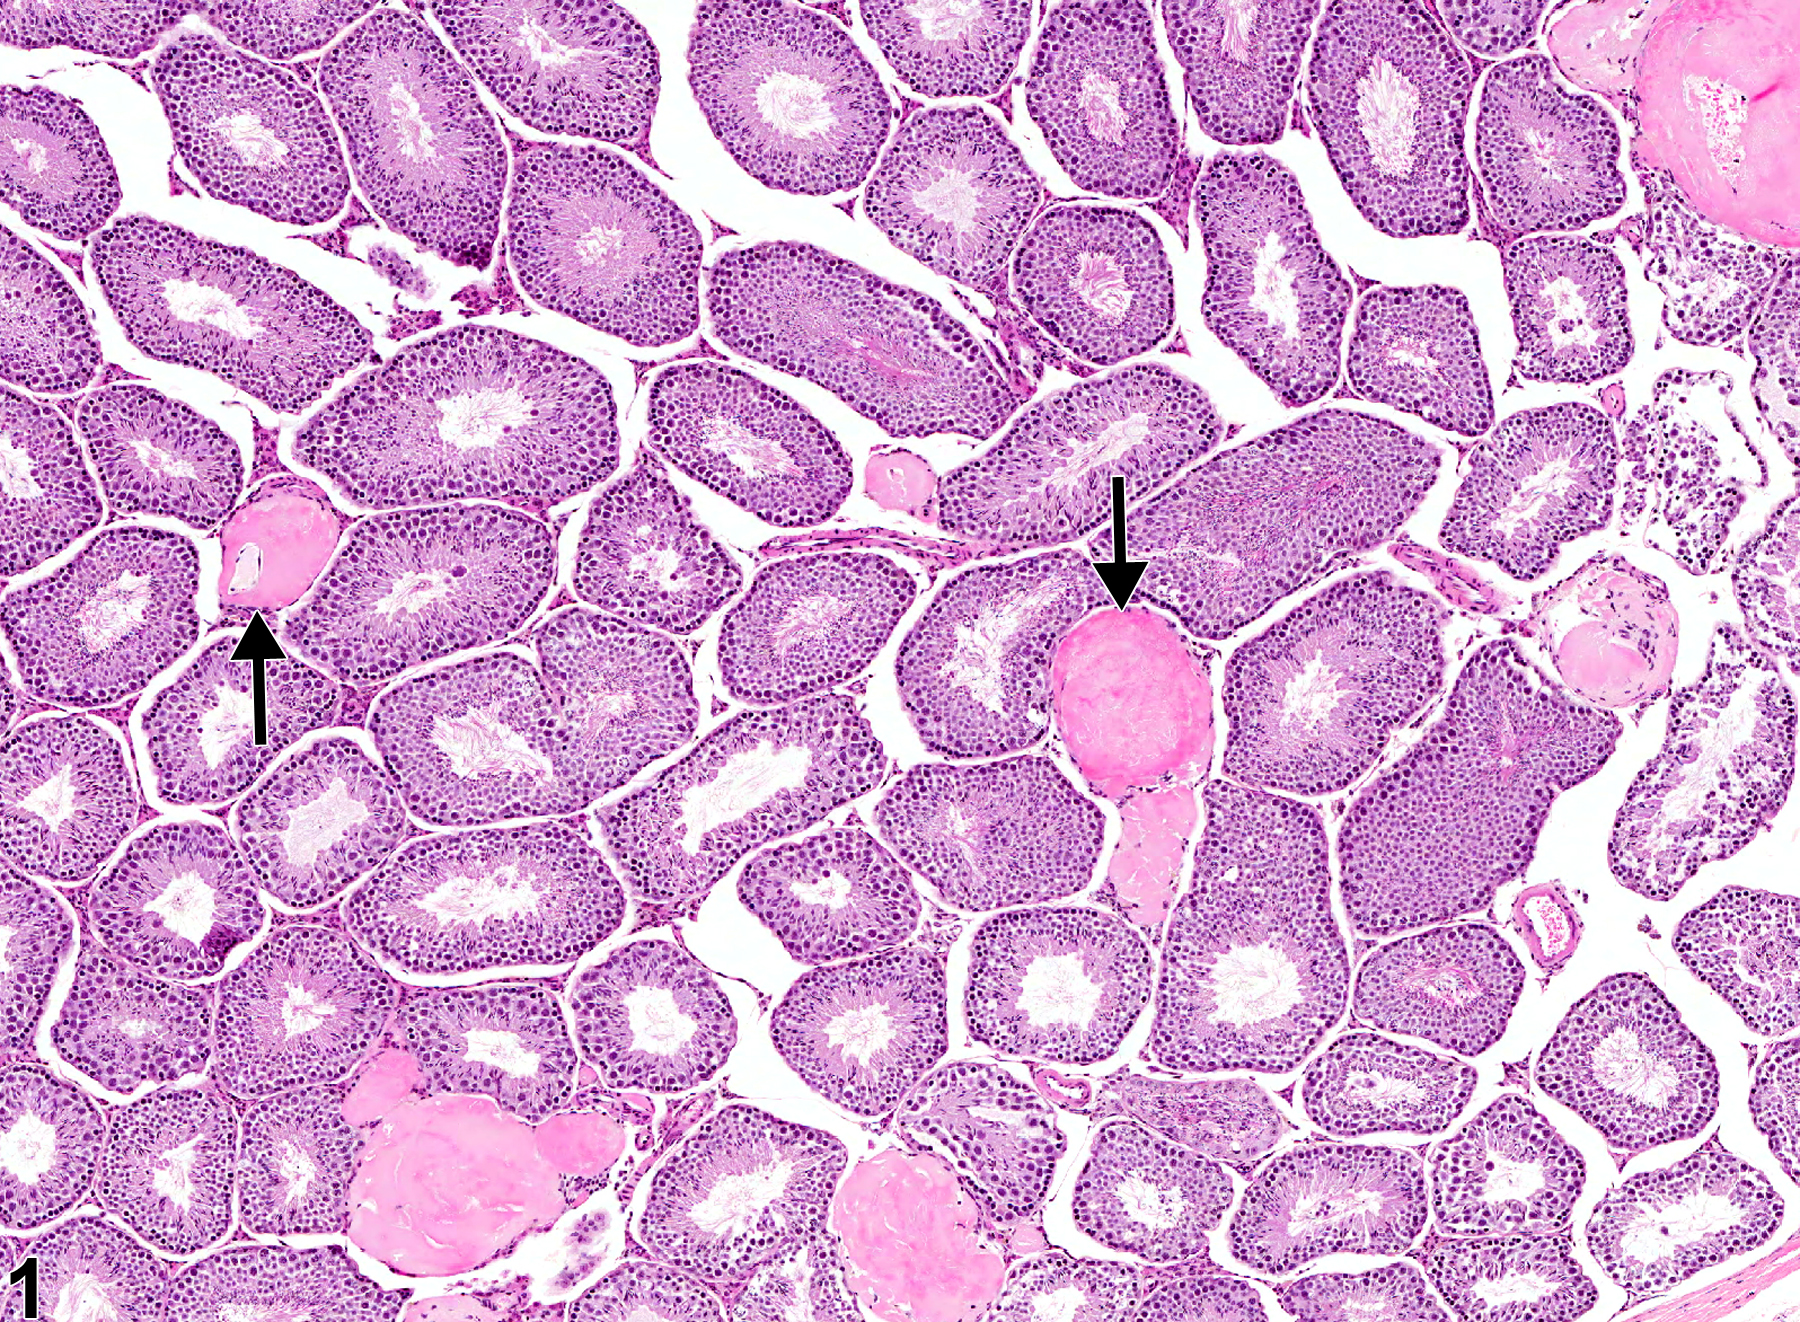 Image of amyloid in the testis from a male B6C3F1 mouse in a chronic study